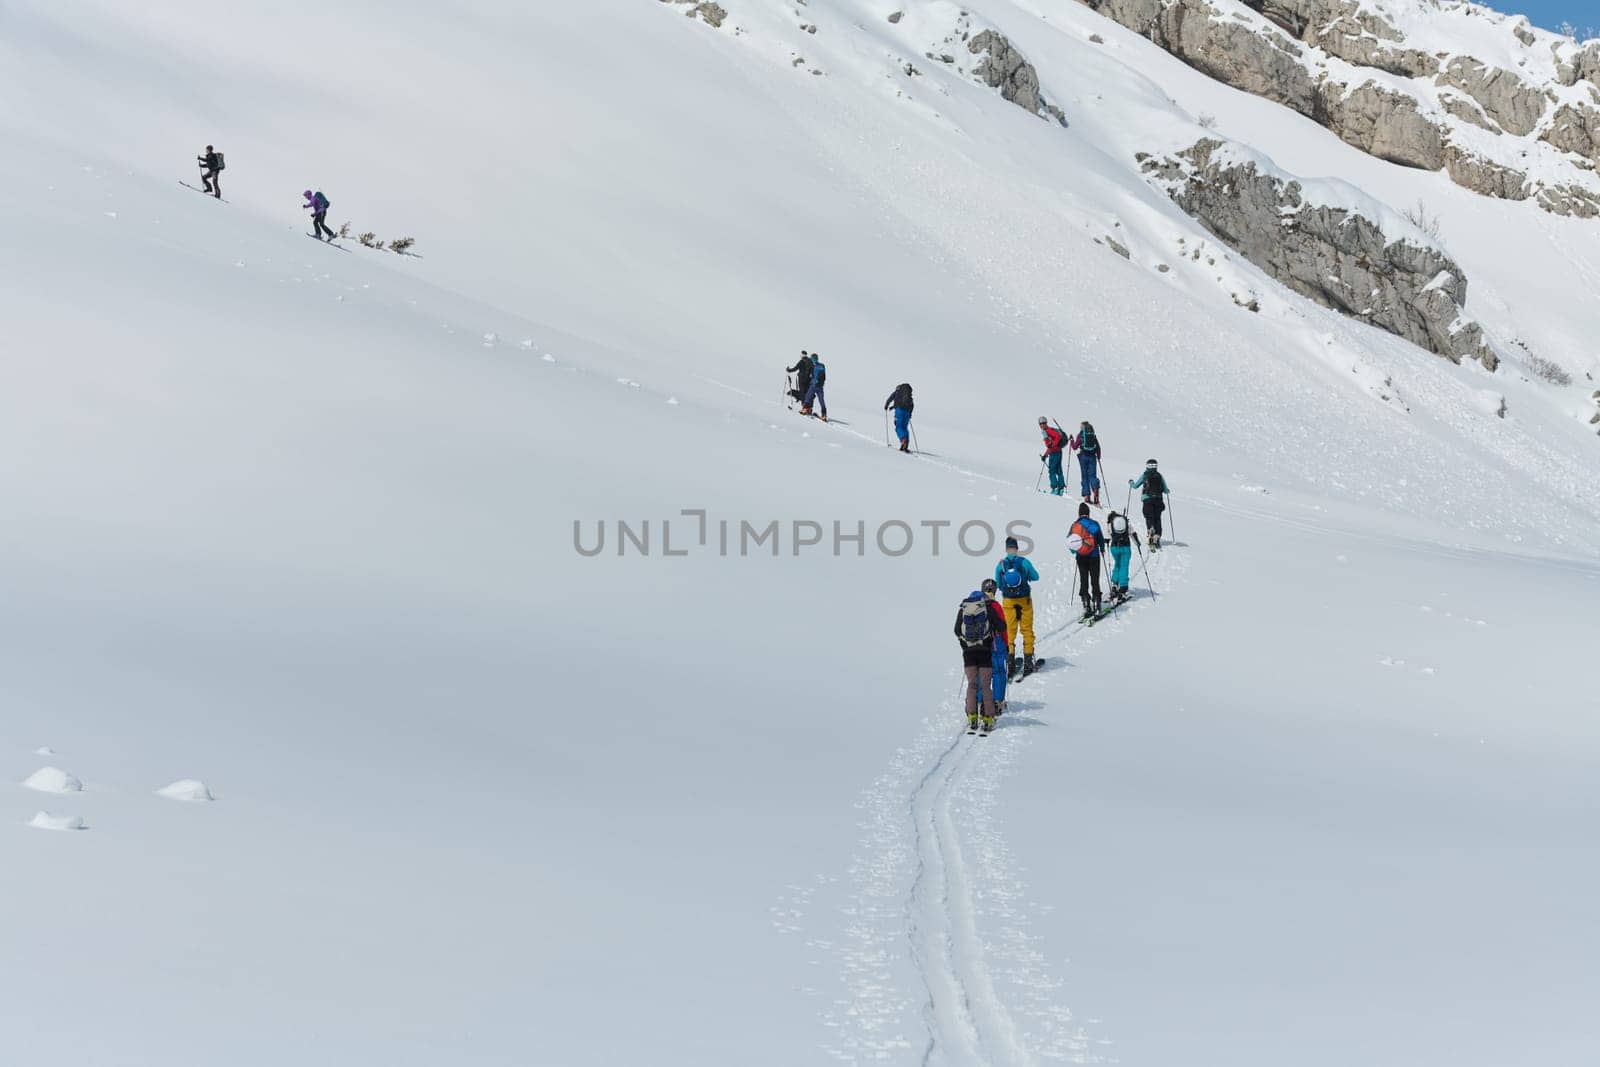 Pushing Limits on High: A Team of Experts Conquers the Backcountry by dotshock